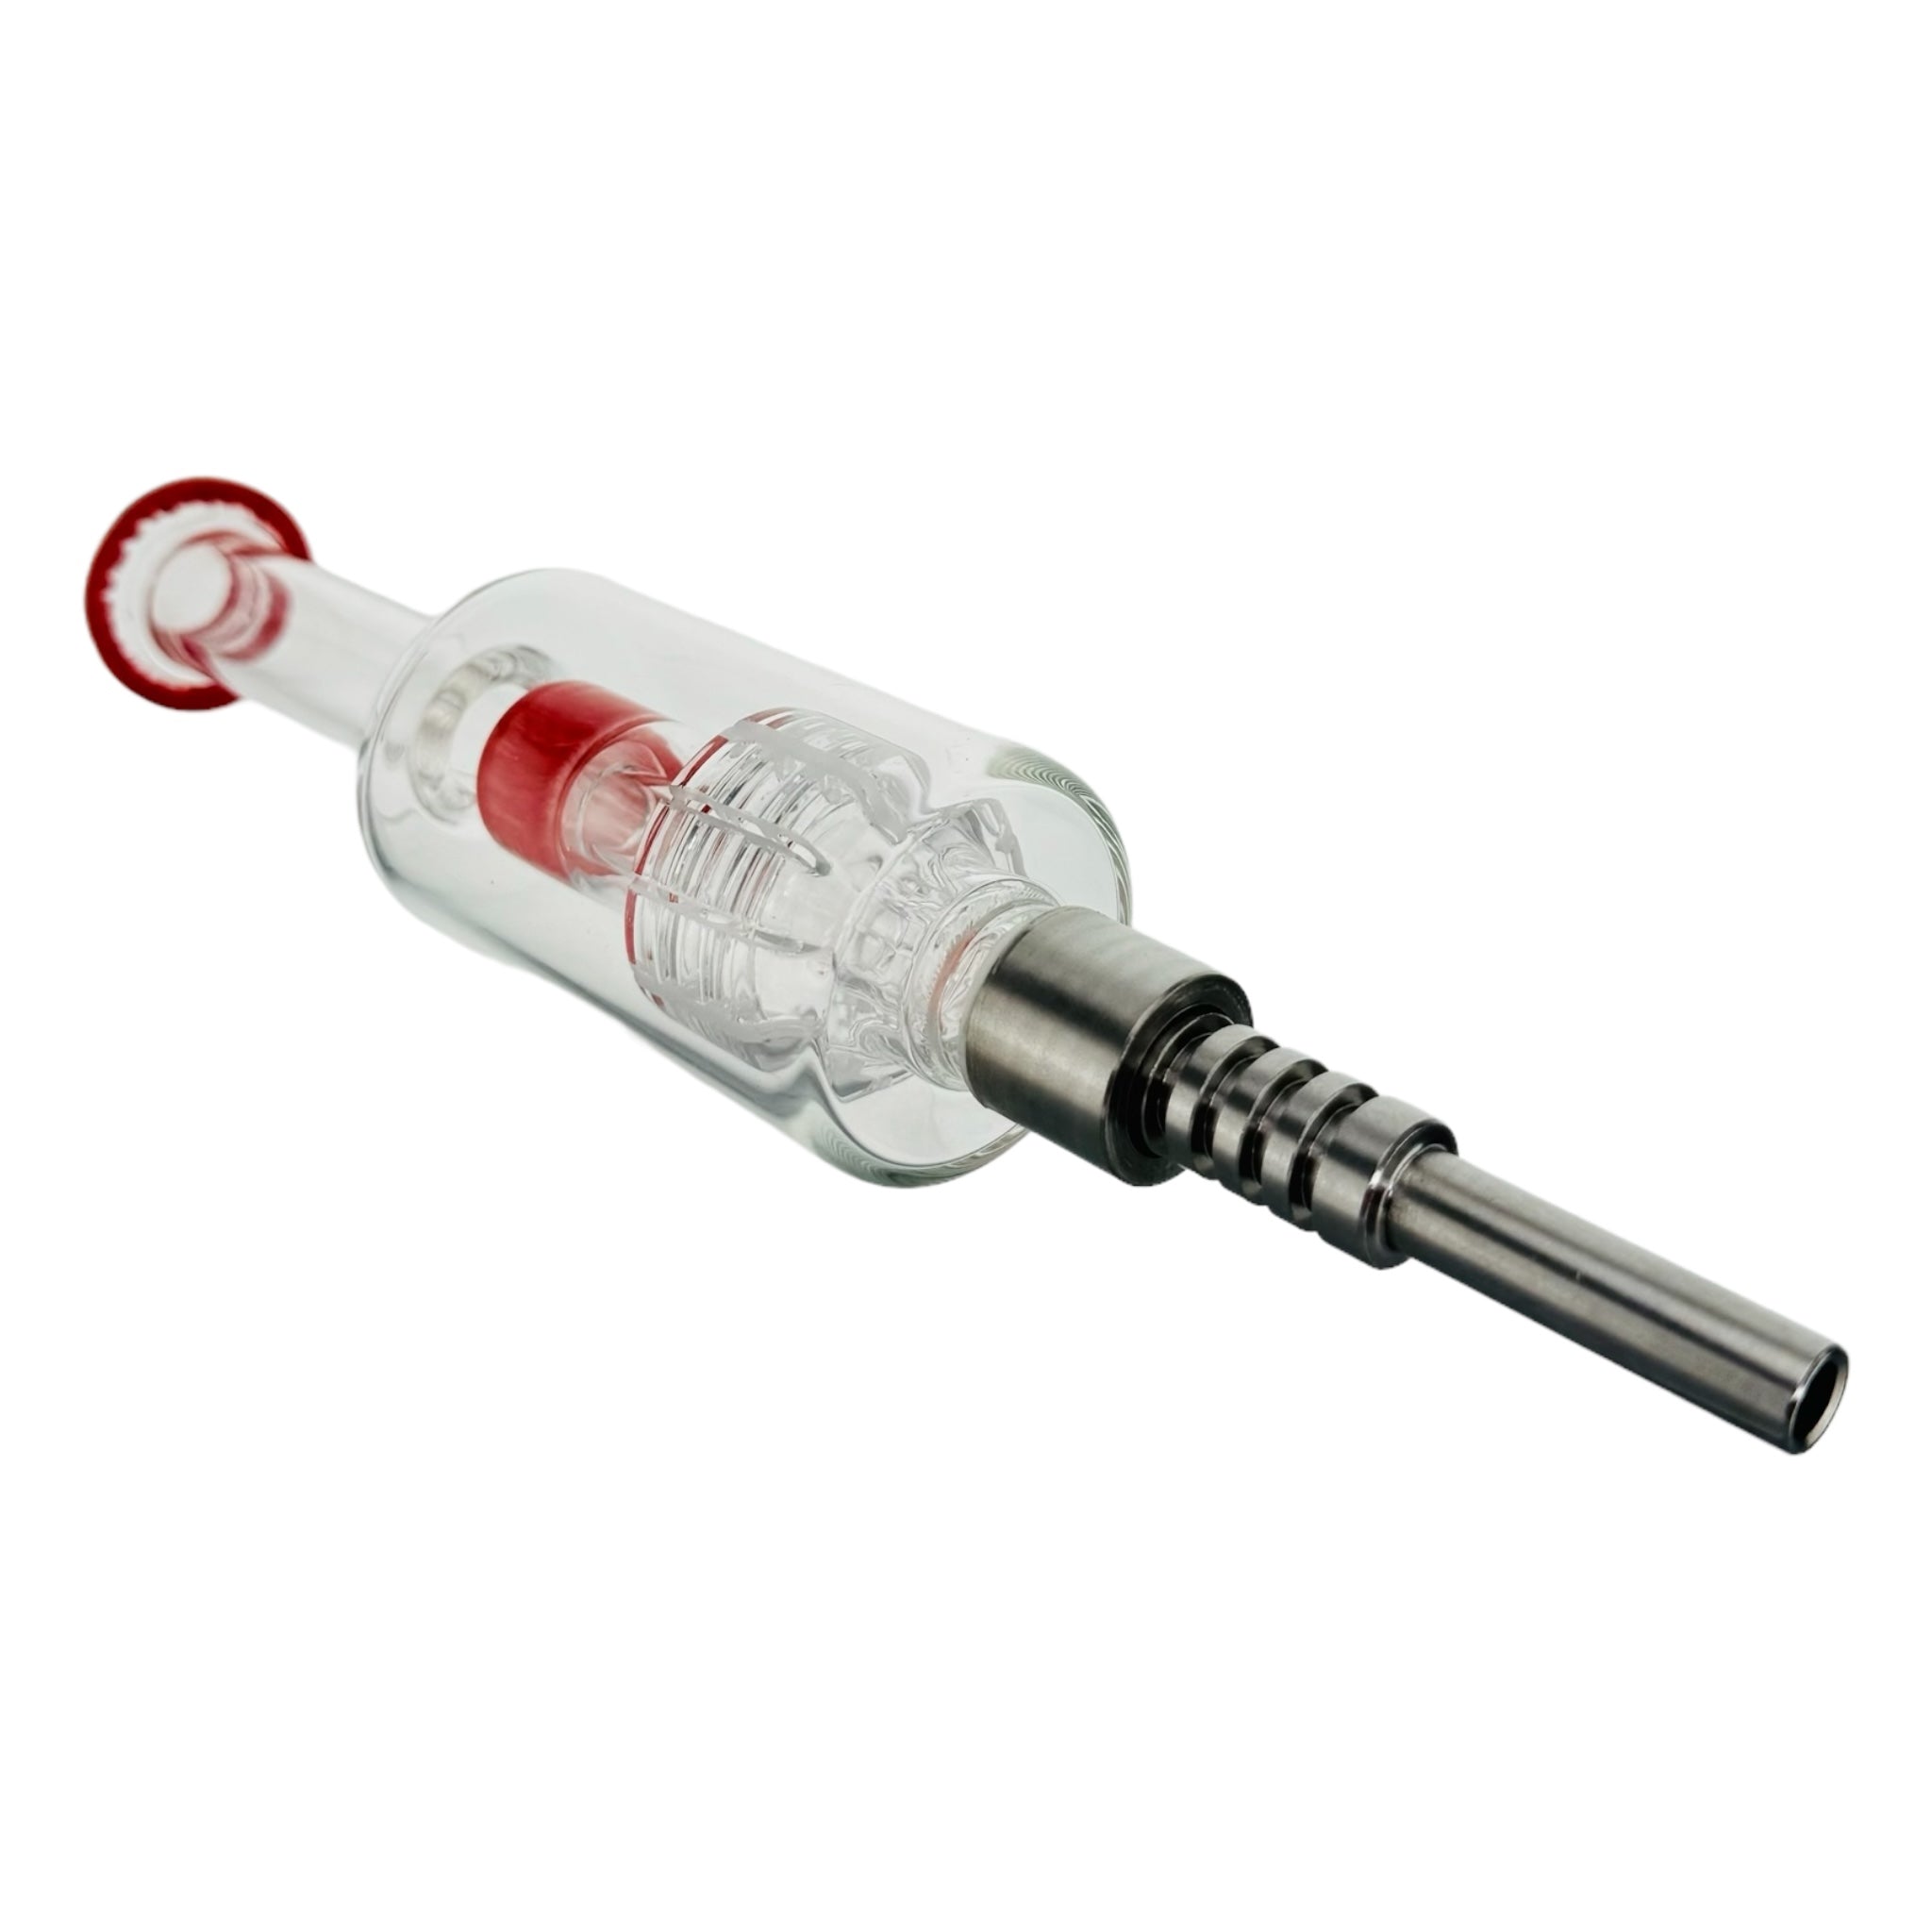 Red Nectar Collector With Slit Disc Perc And Threaded Metal Tip